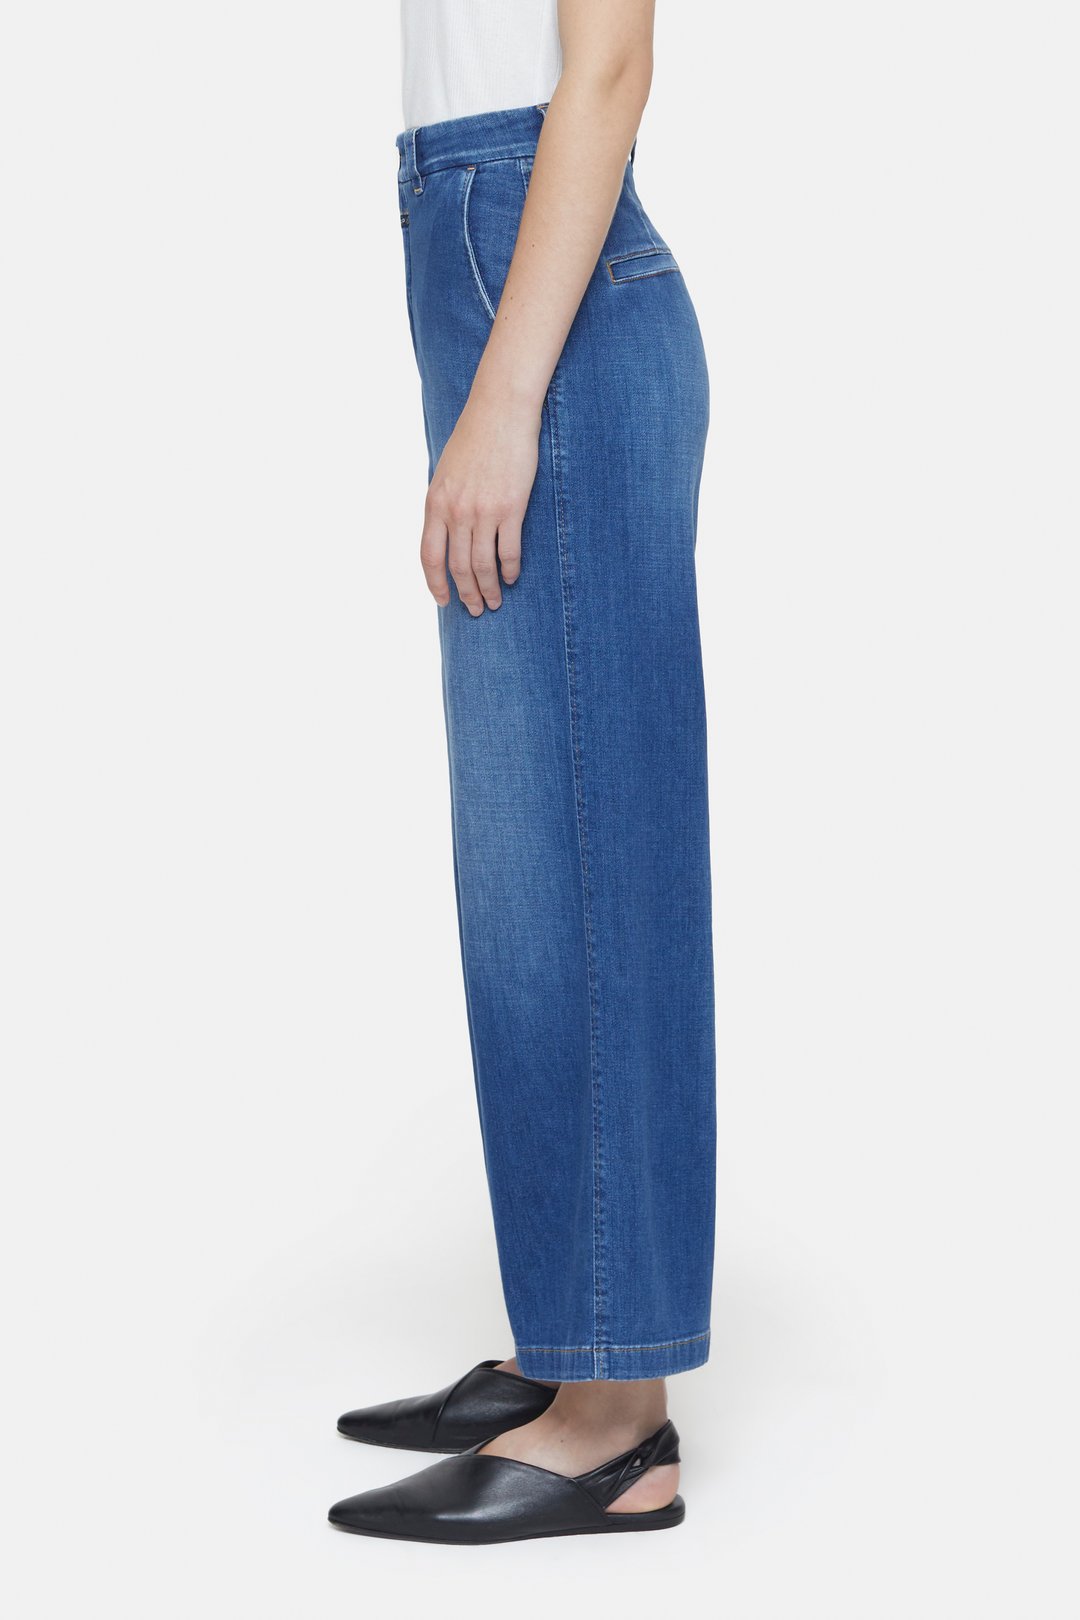 WIDE JEANS - STYLE NAME BARTON | CLOSED